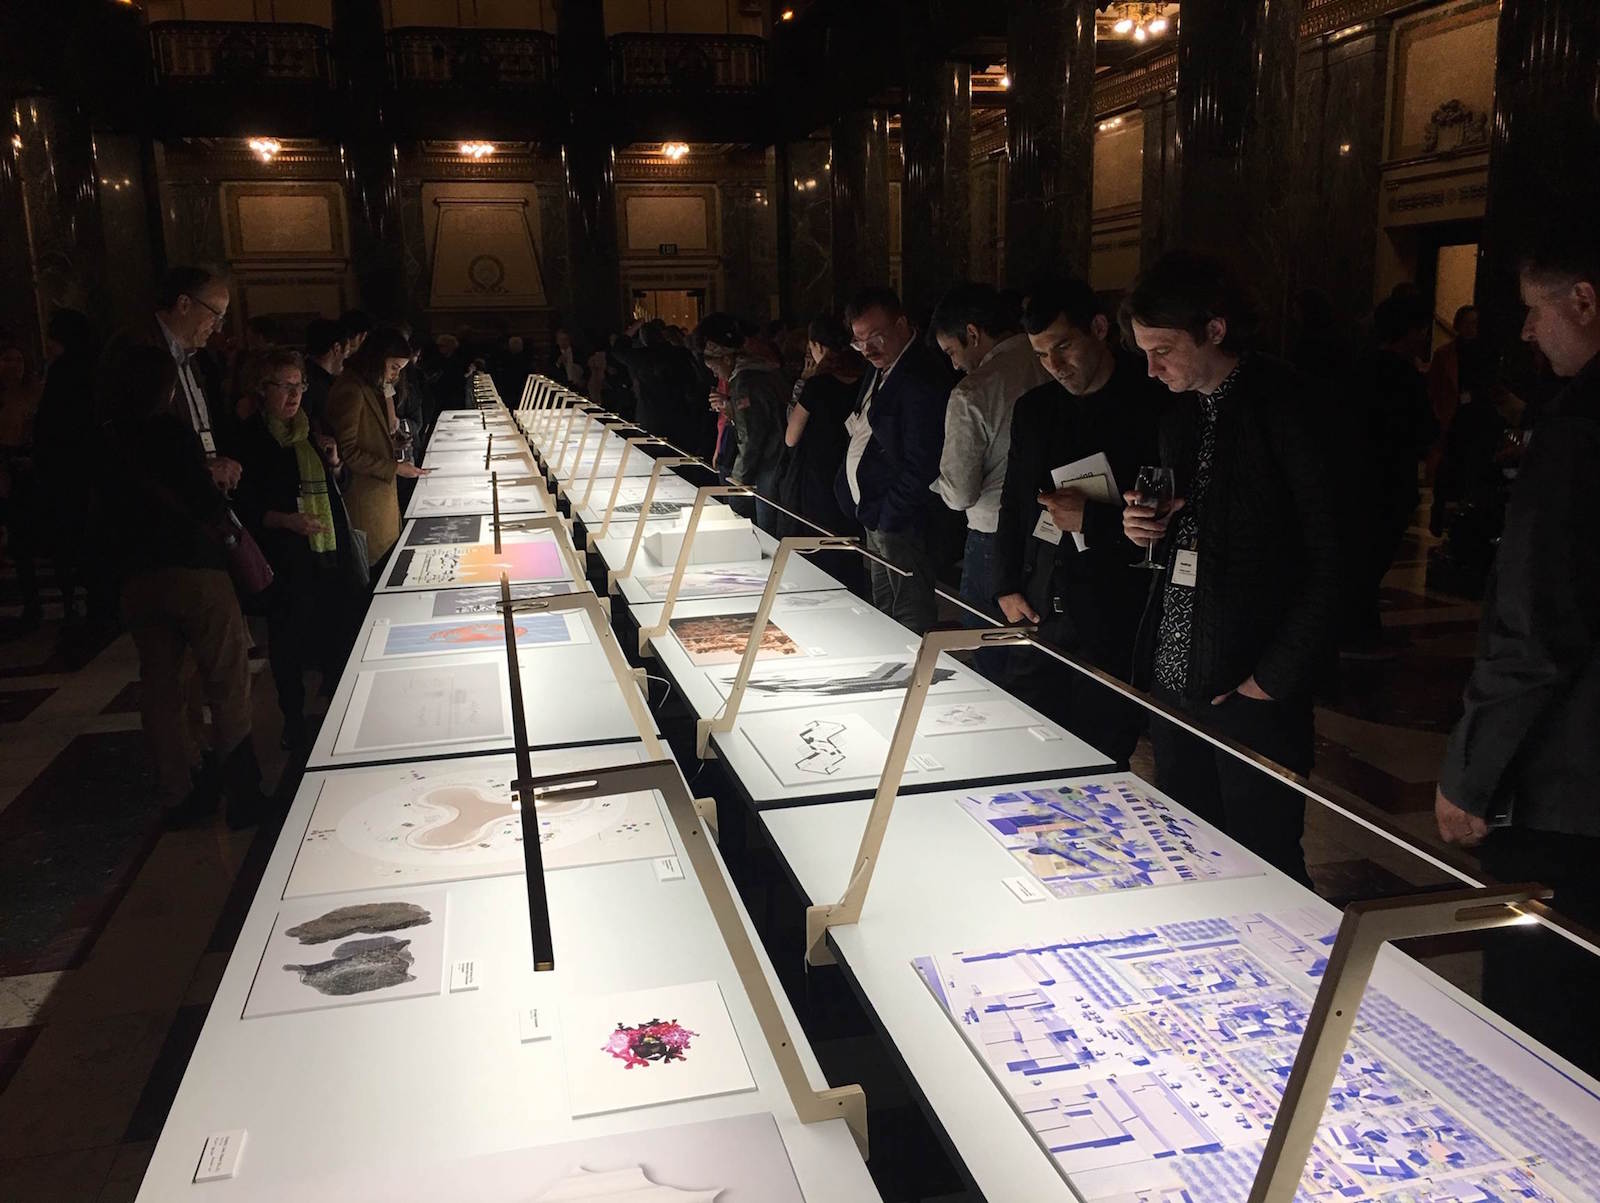 A look at the exhibition "Drawing for the Design Imaginary"